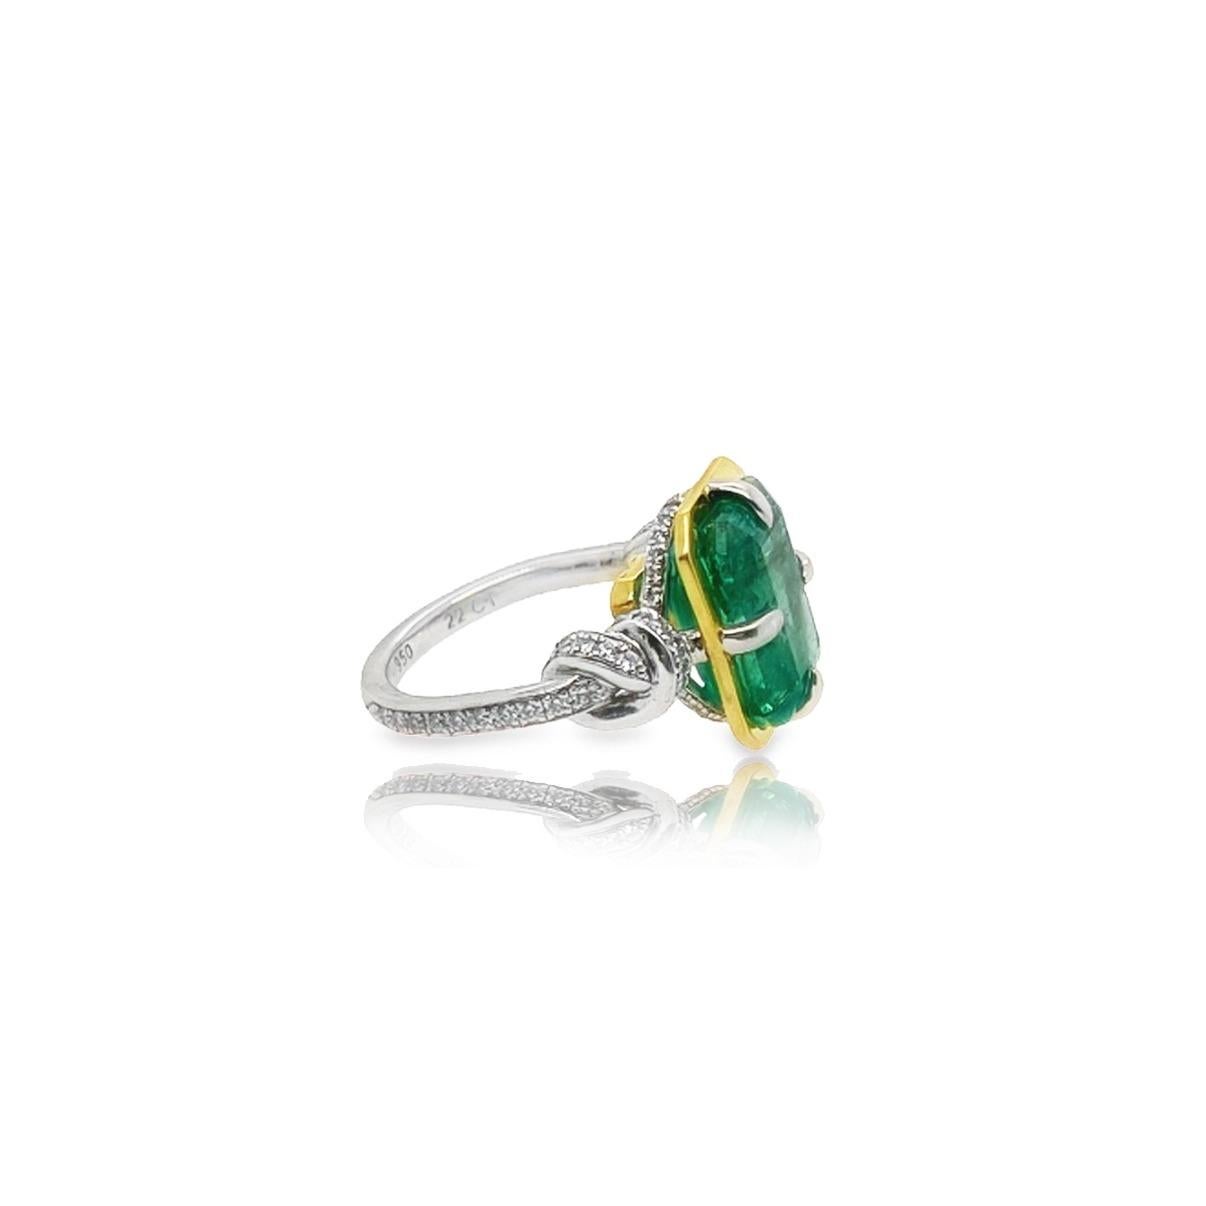 Emerald Cut 5.79 Carat Zambian Emerald in Forget Me Knot Style Ring with Diamonds